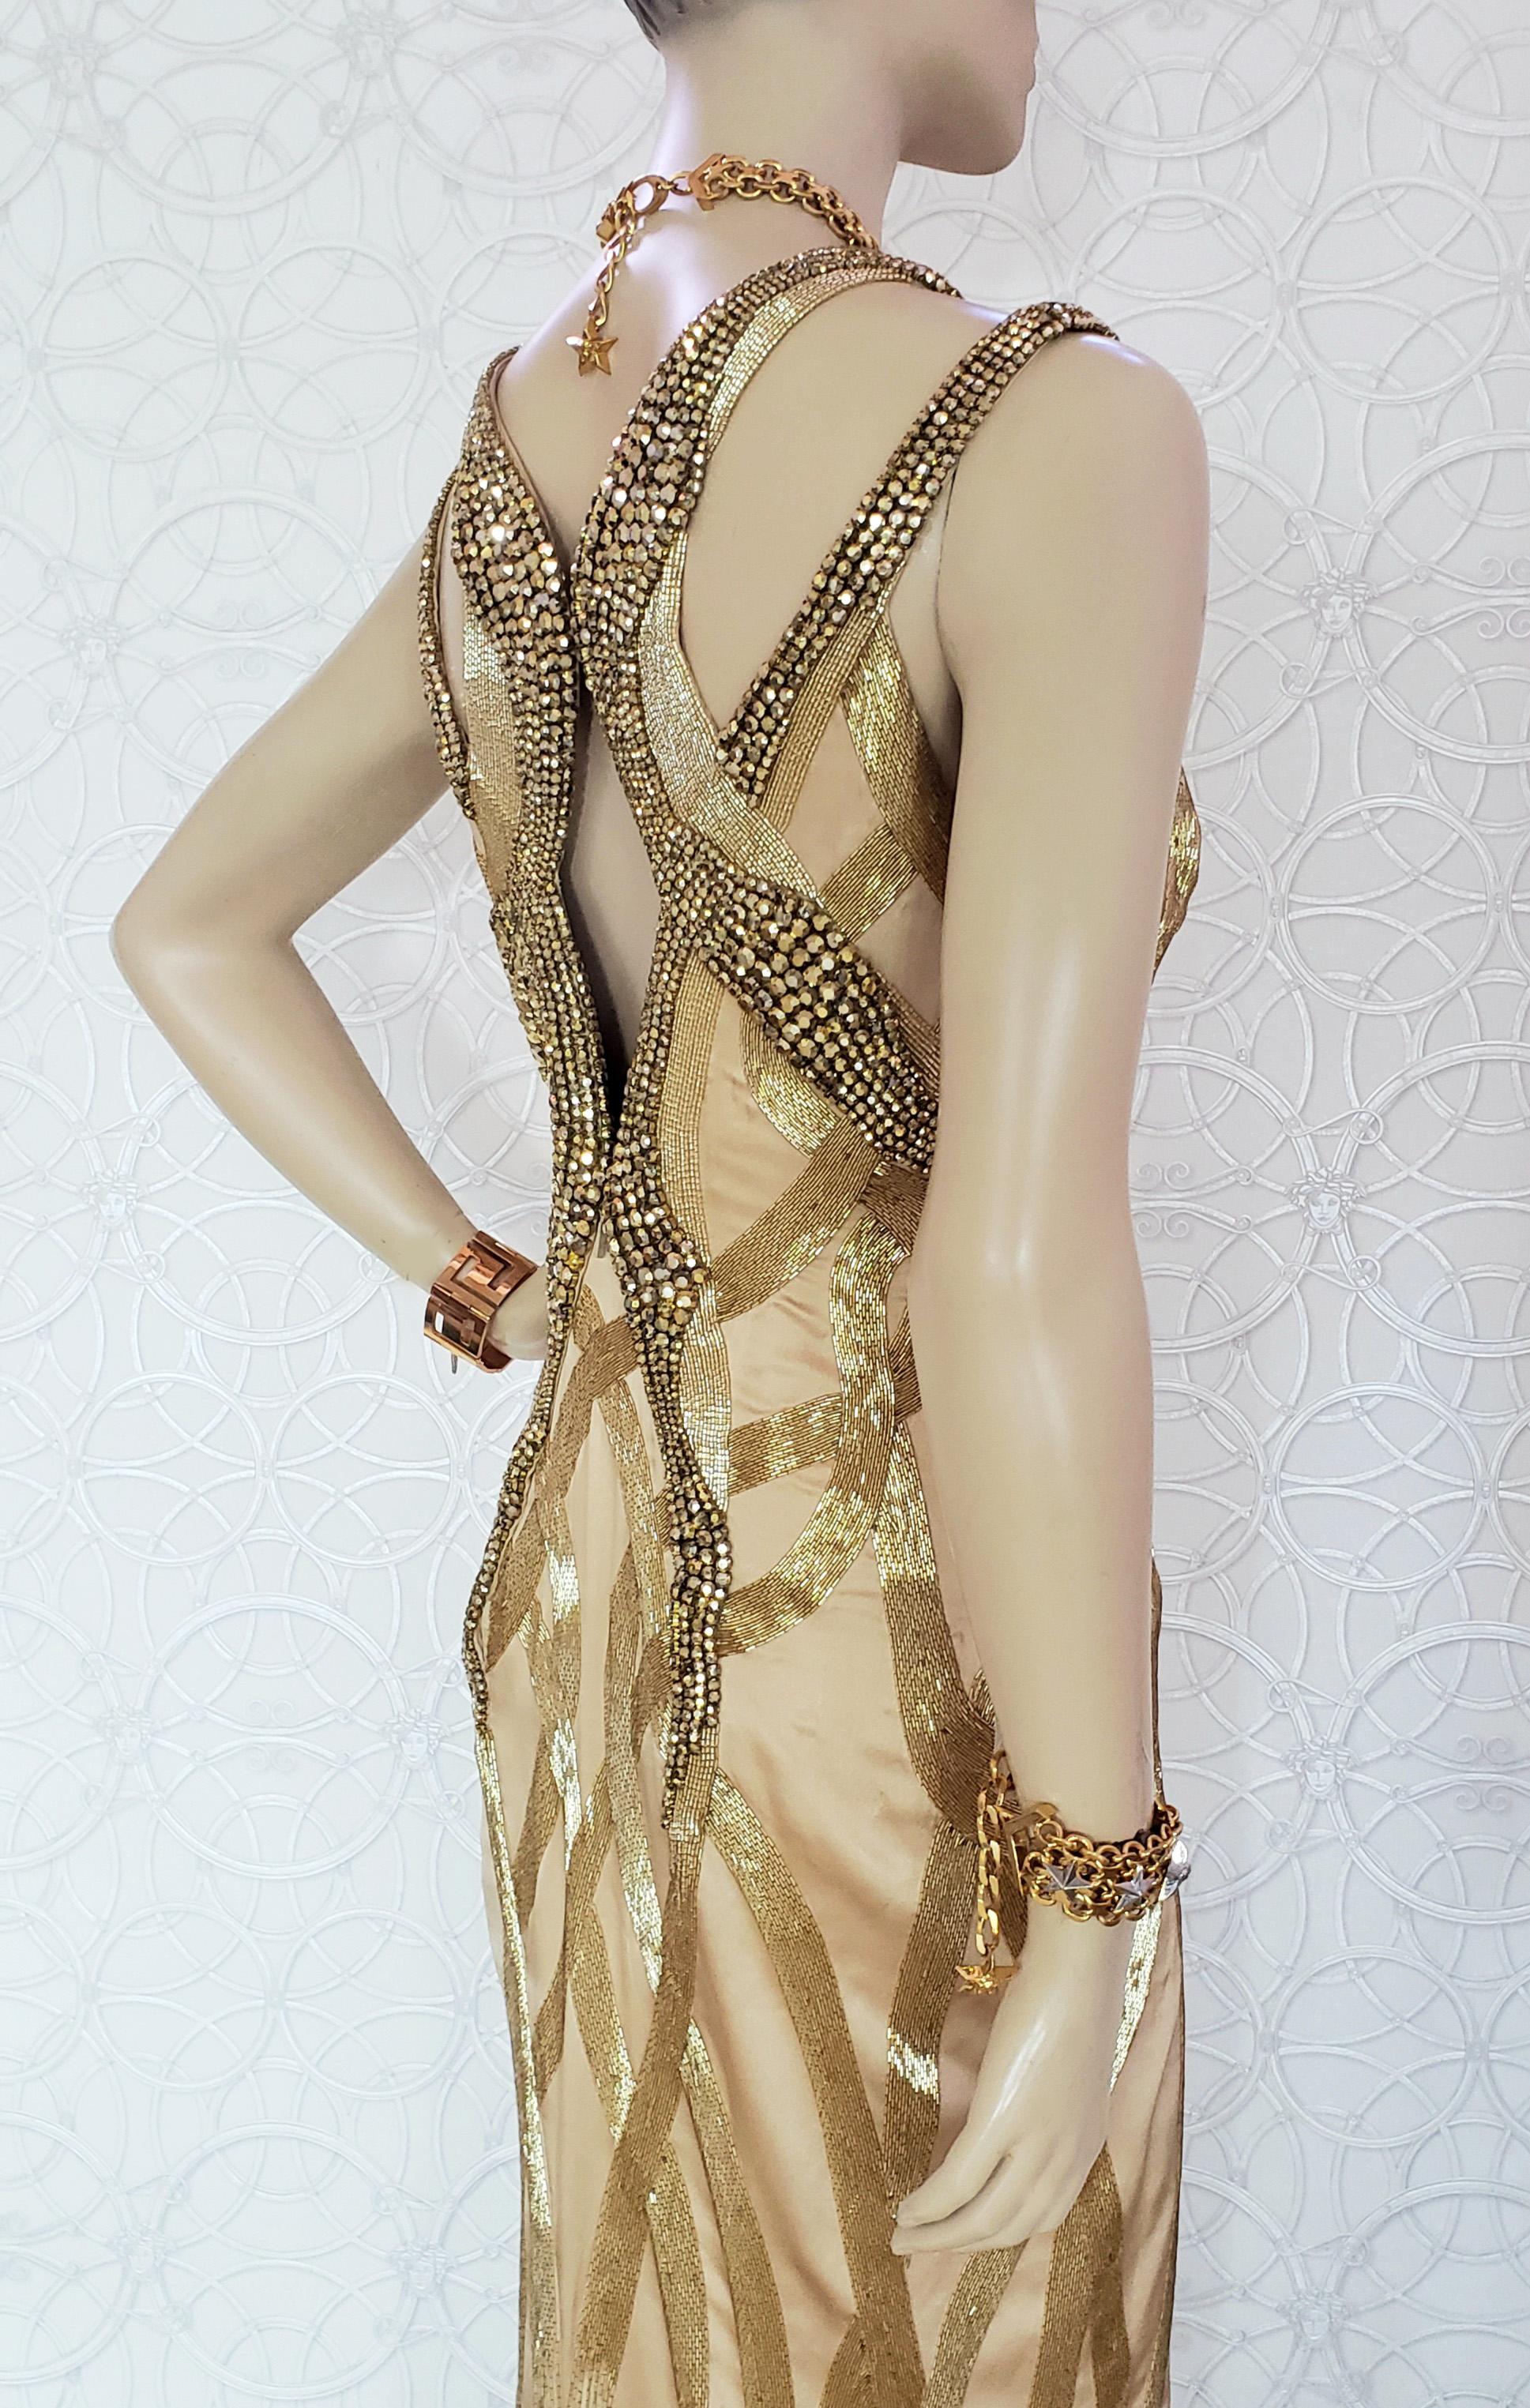 VERSACE GOLDEN EMBELLISHED w/ SWAROWSKI STONES GOWN  DRESS as seen on Irina  For Sale 3